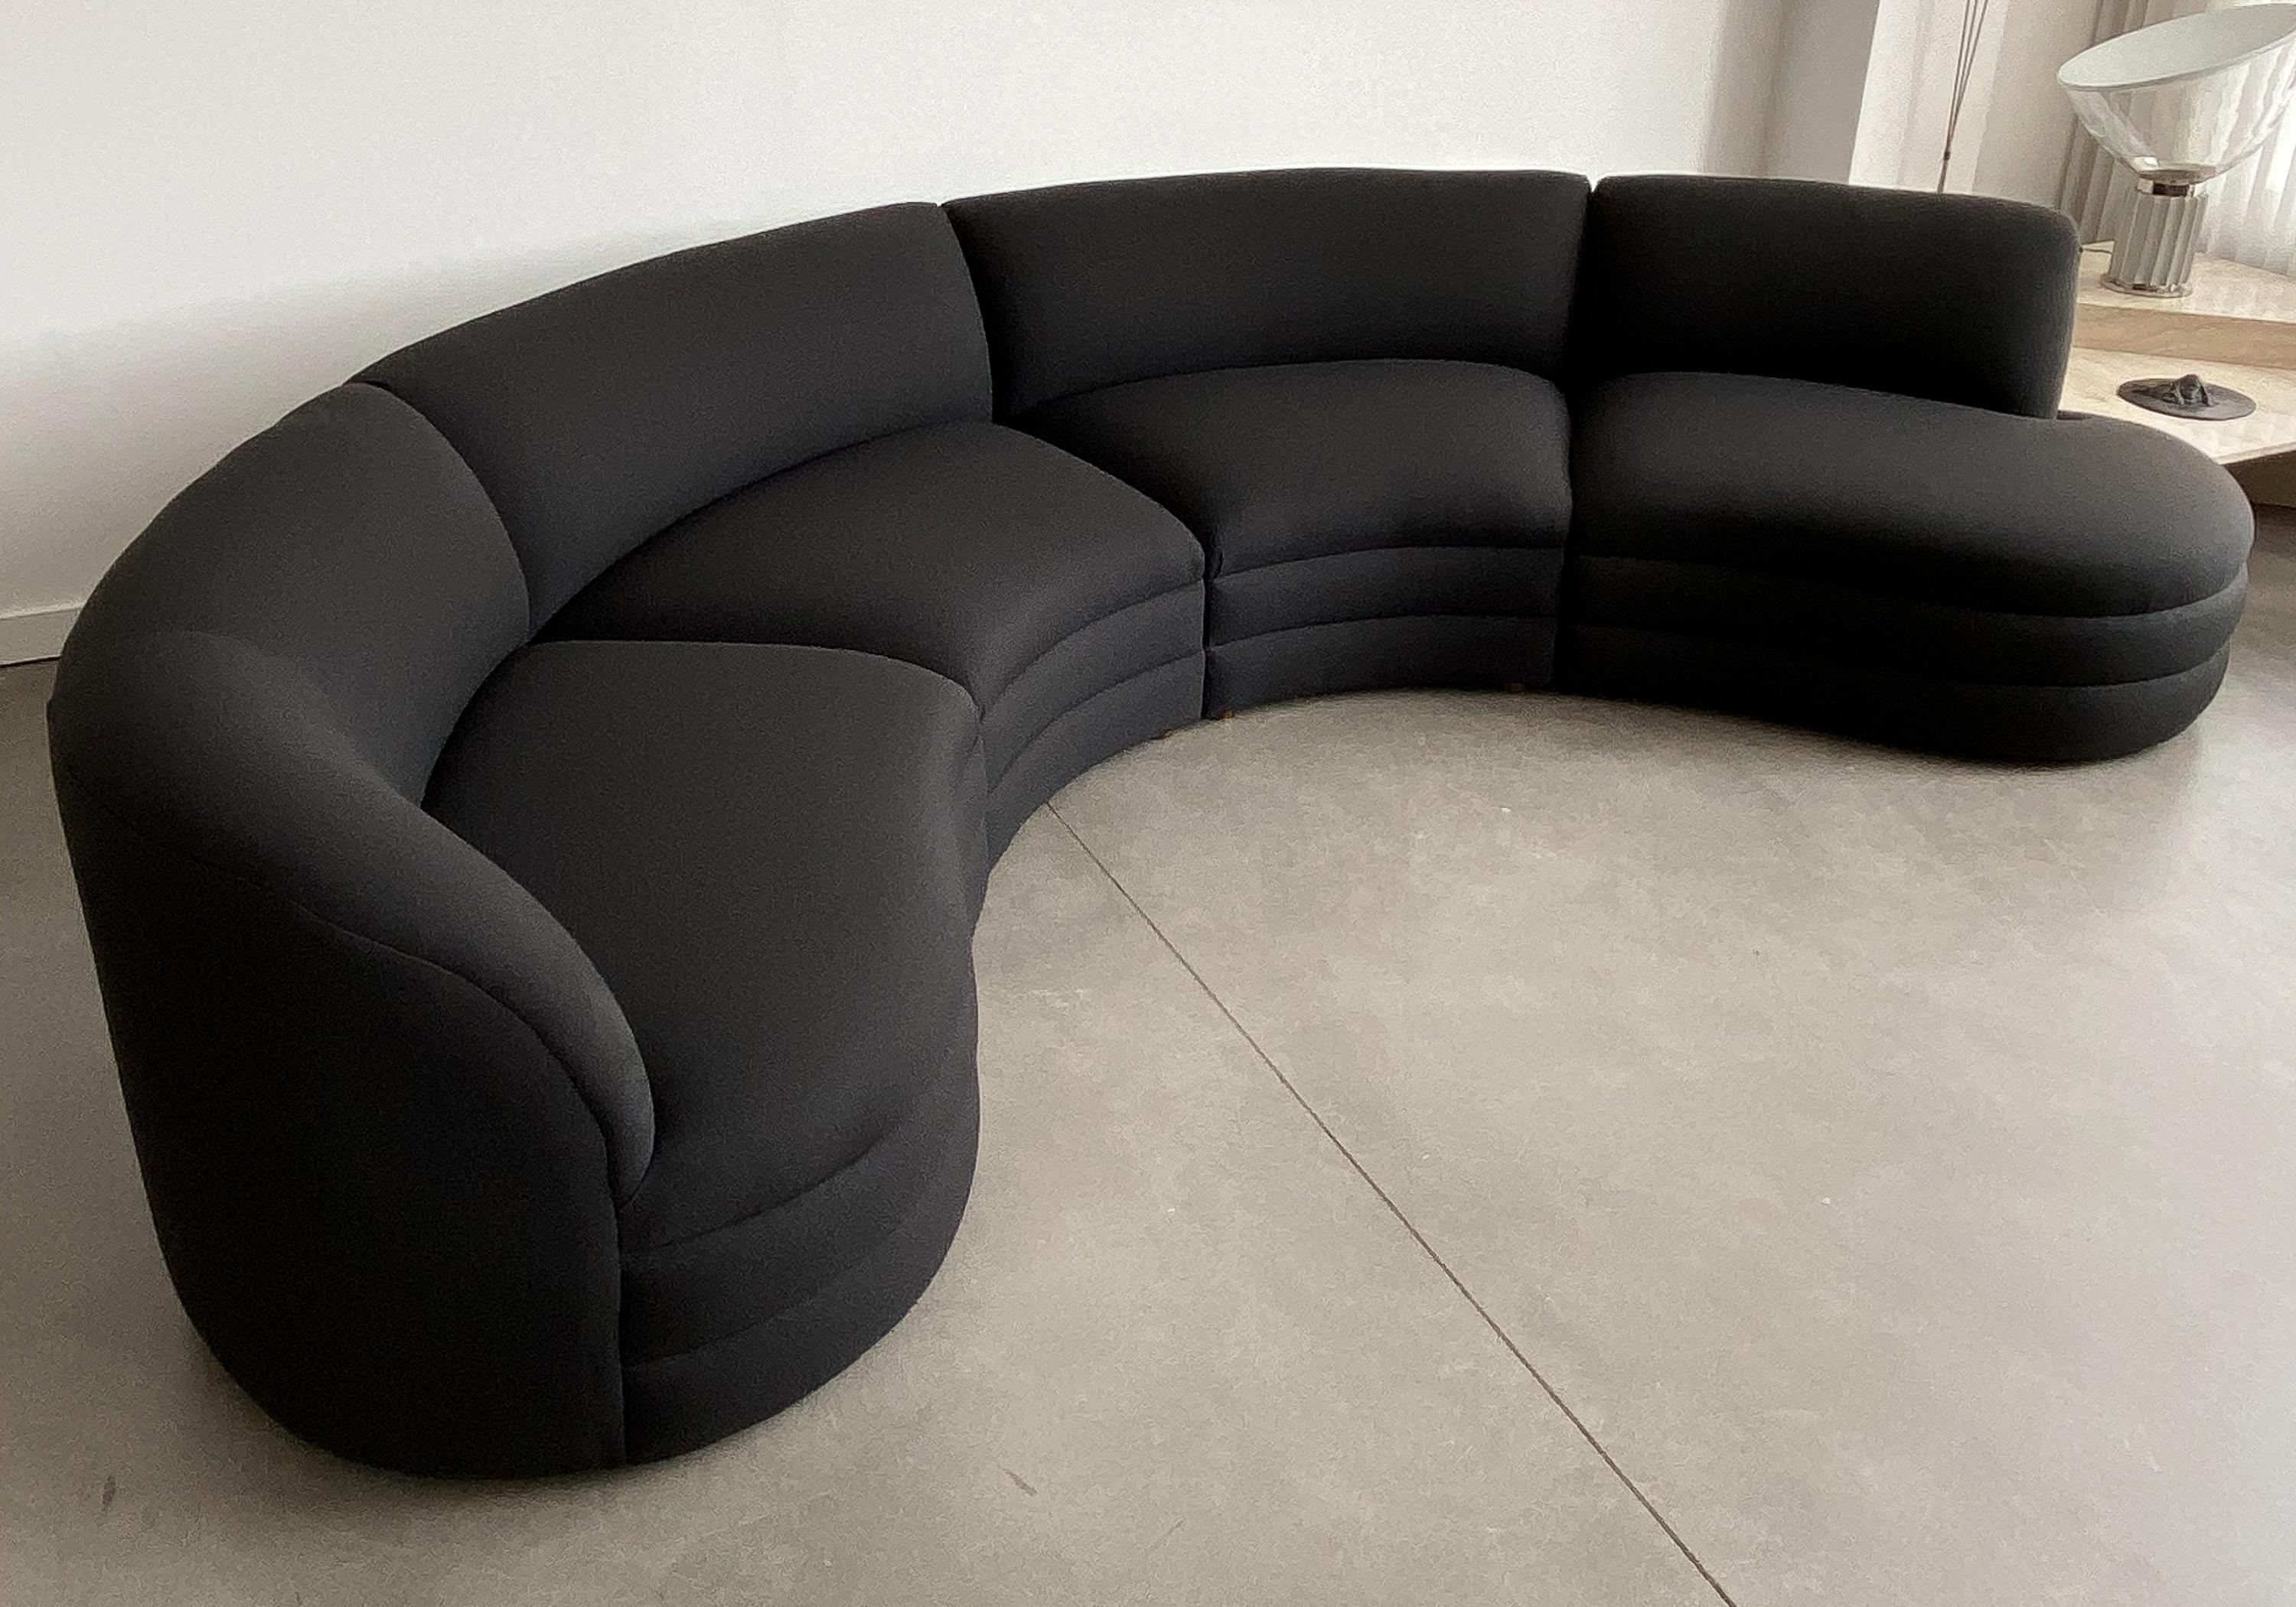 20th Century Four Piece Curved Sectional Sofa Attributed to Vladimir Kagan